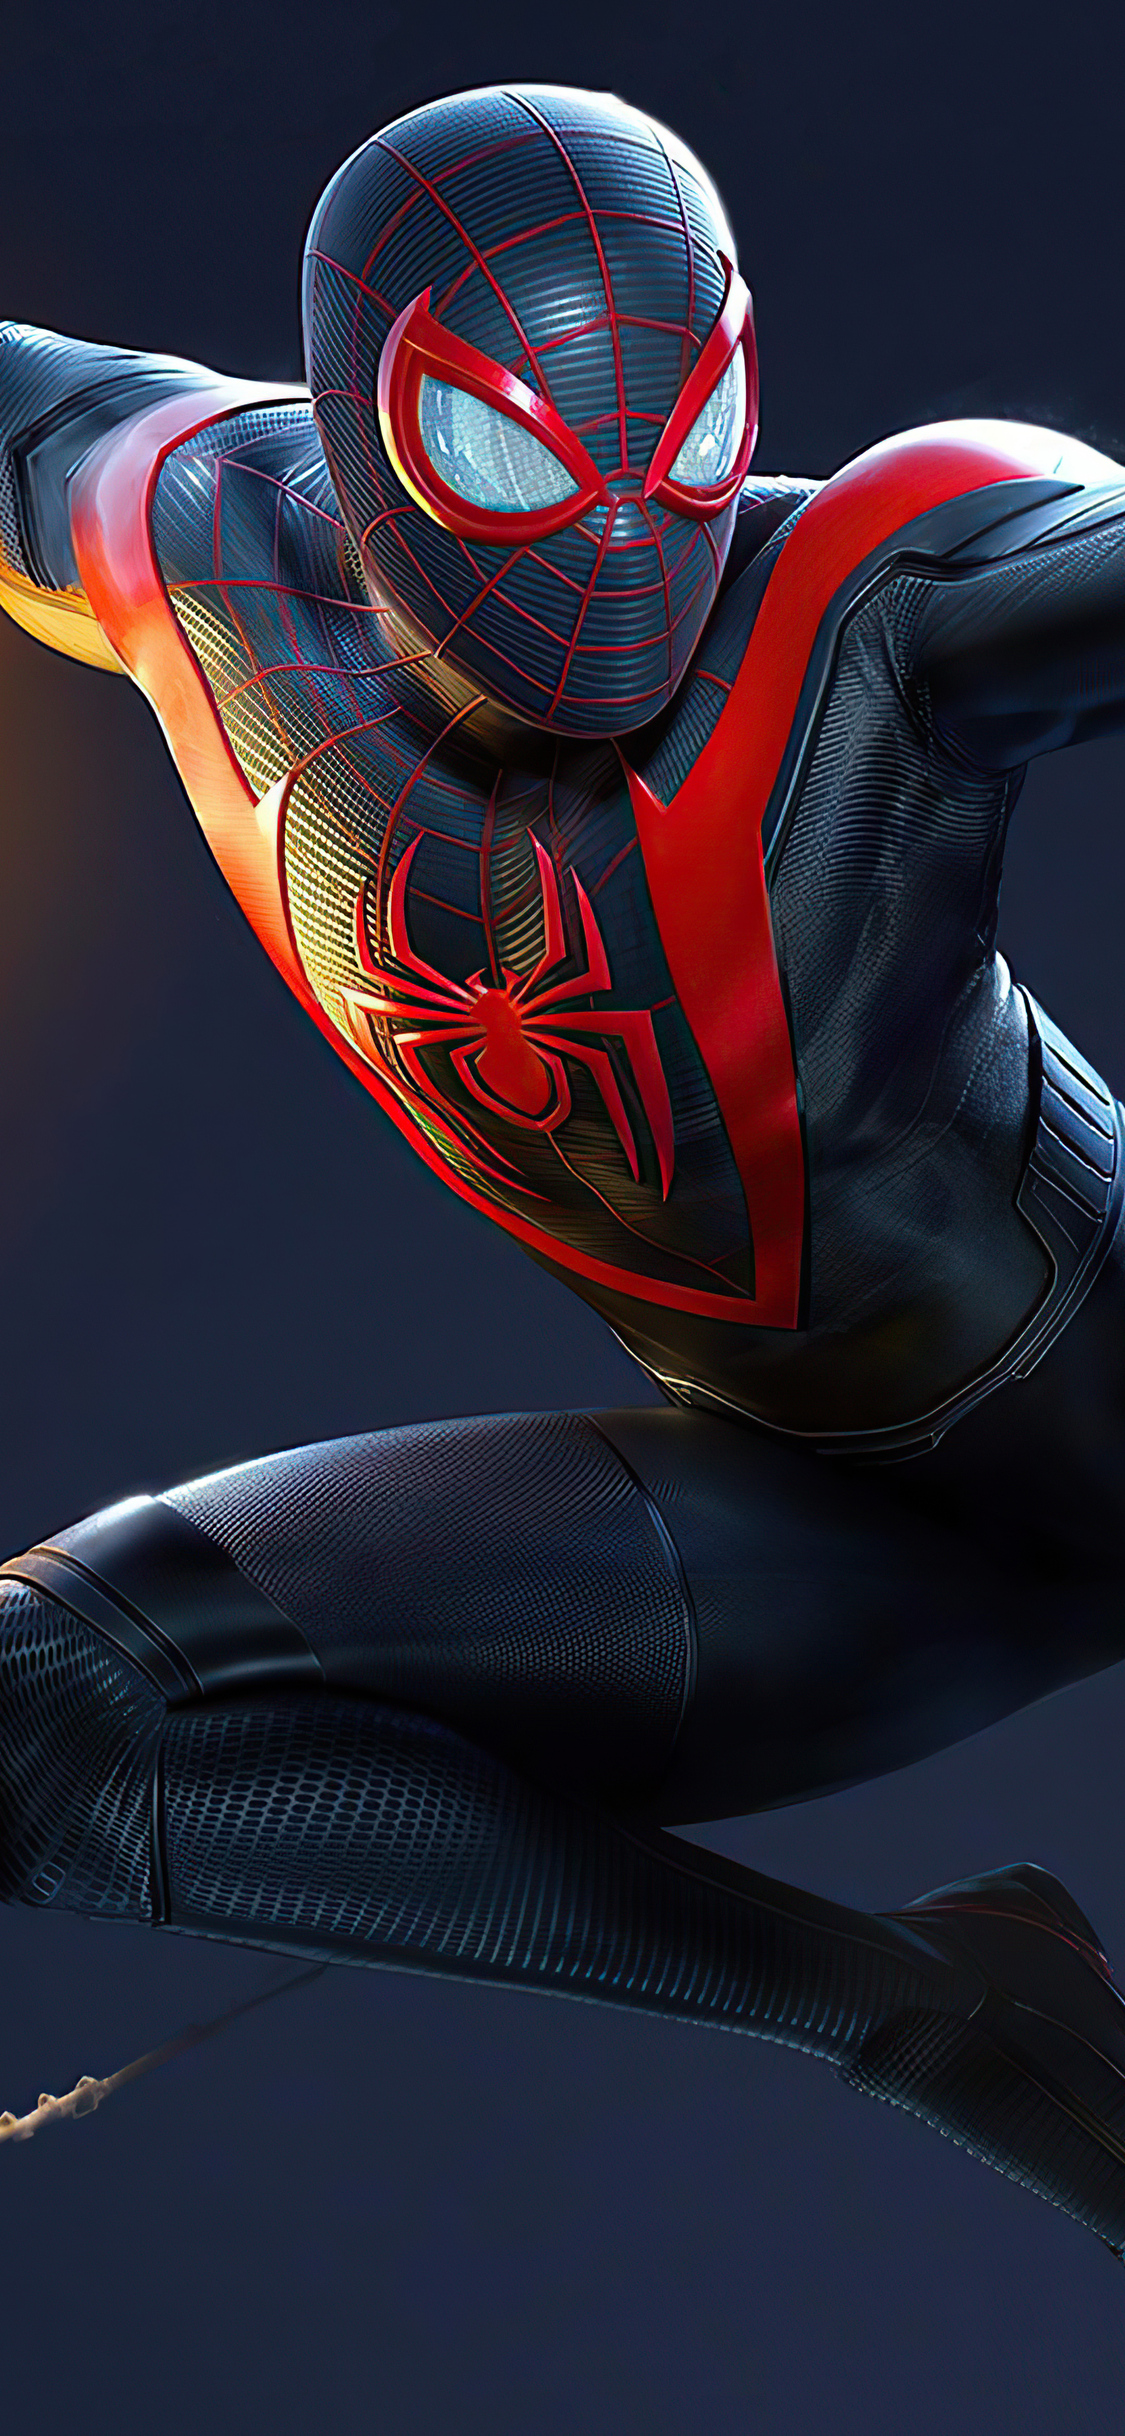 SpiderMan Miles Morales Logo Wallpaper  Cat with Monocle